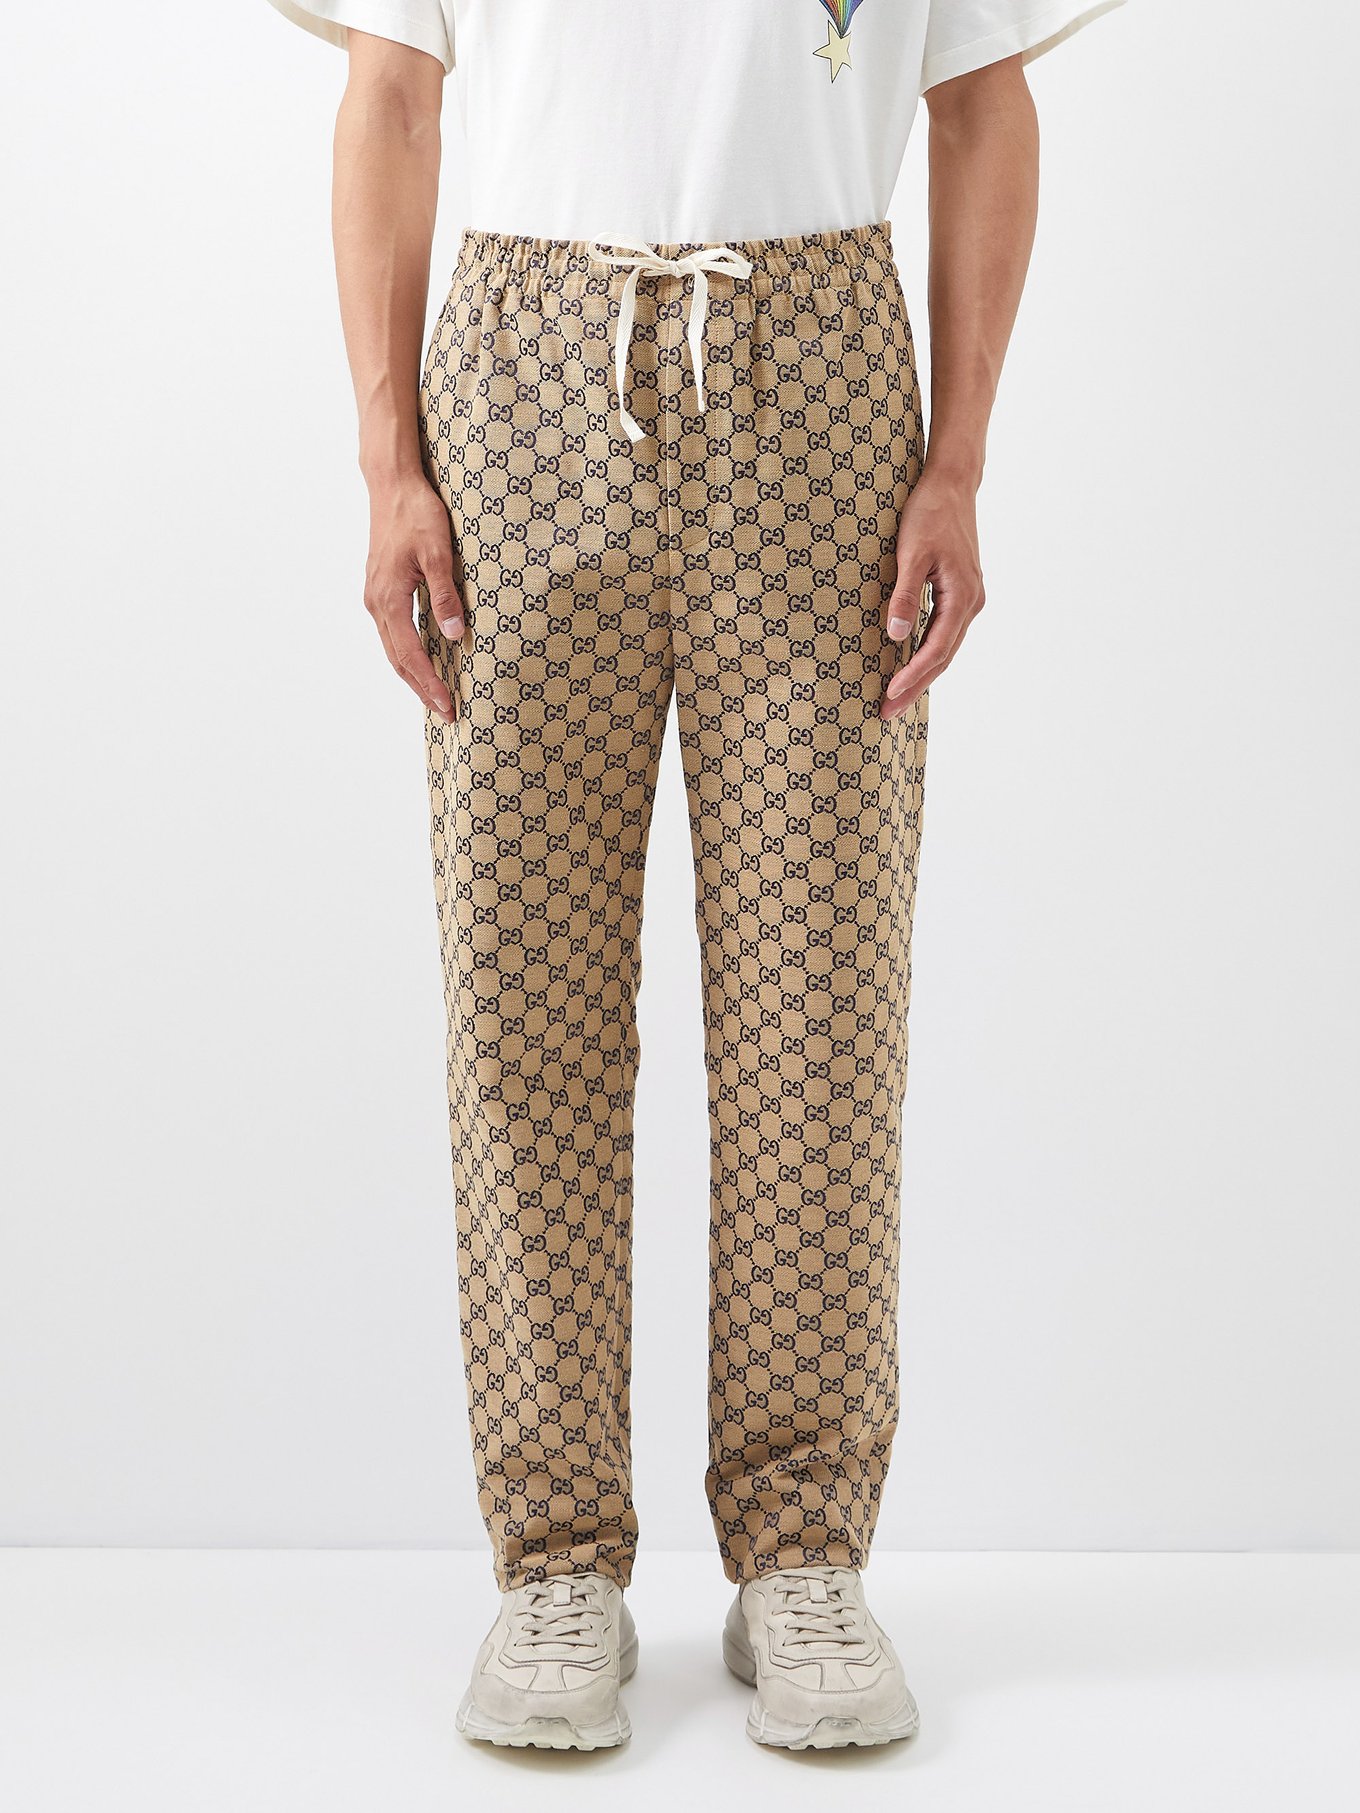 Gucci: Floral Print Pyjama-Style Trousers and Shirt